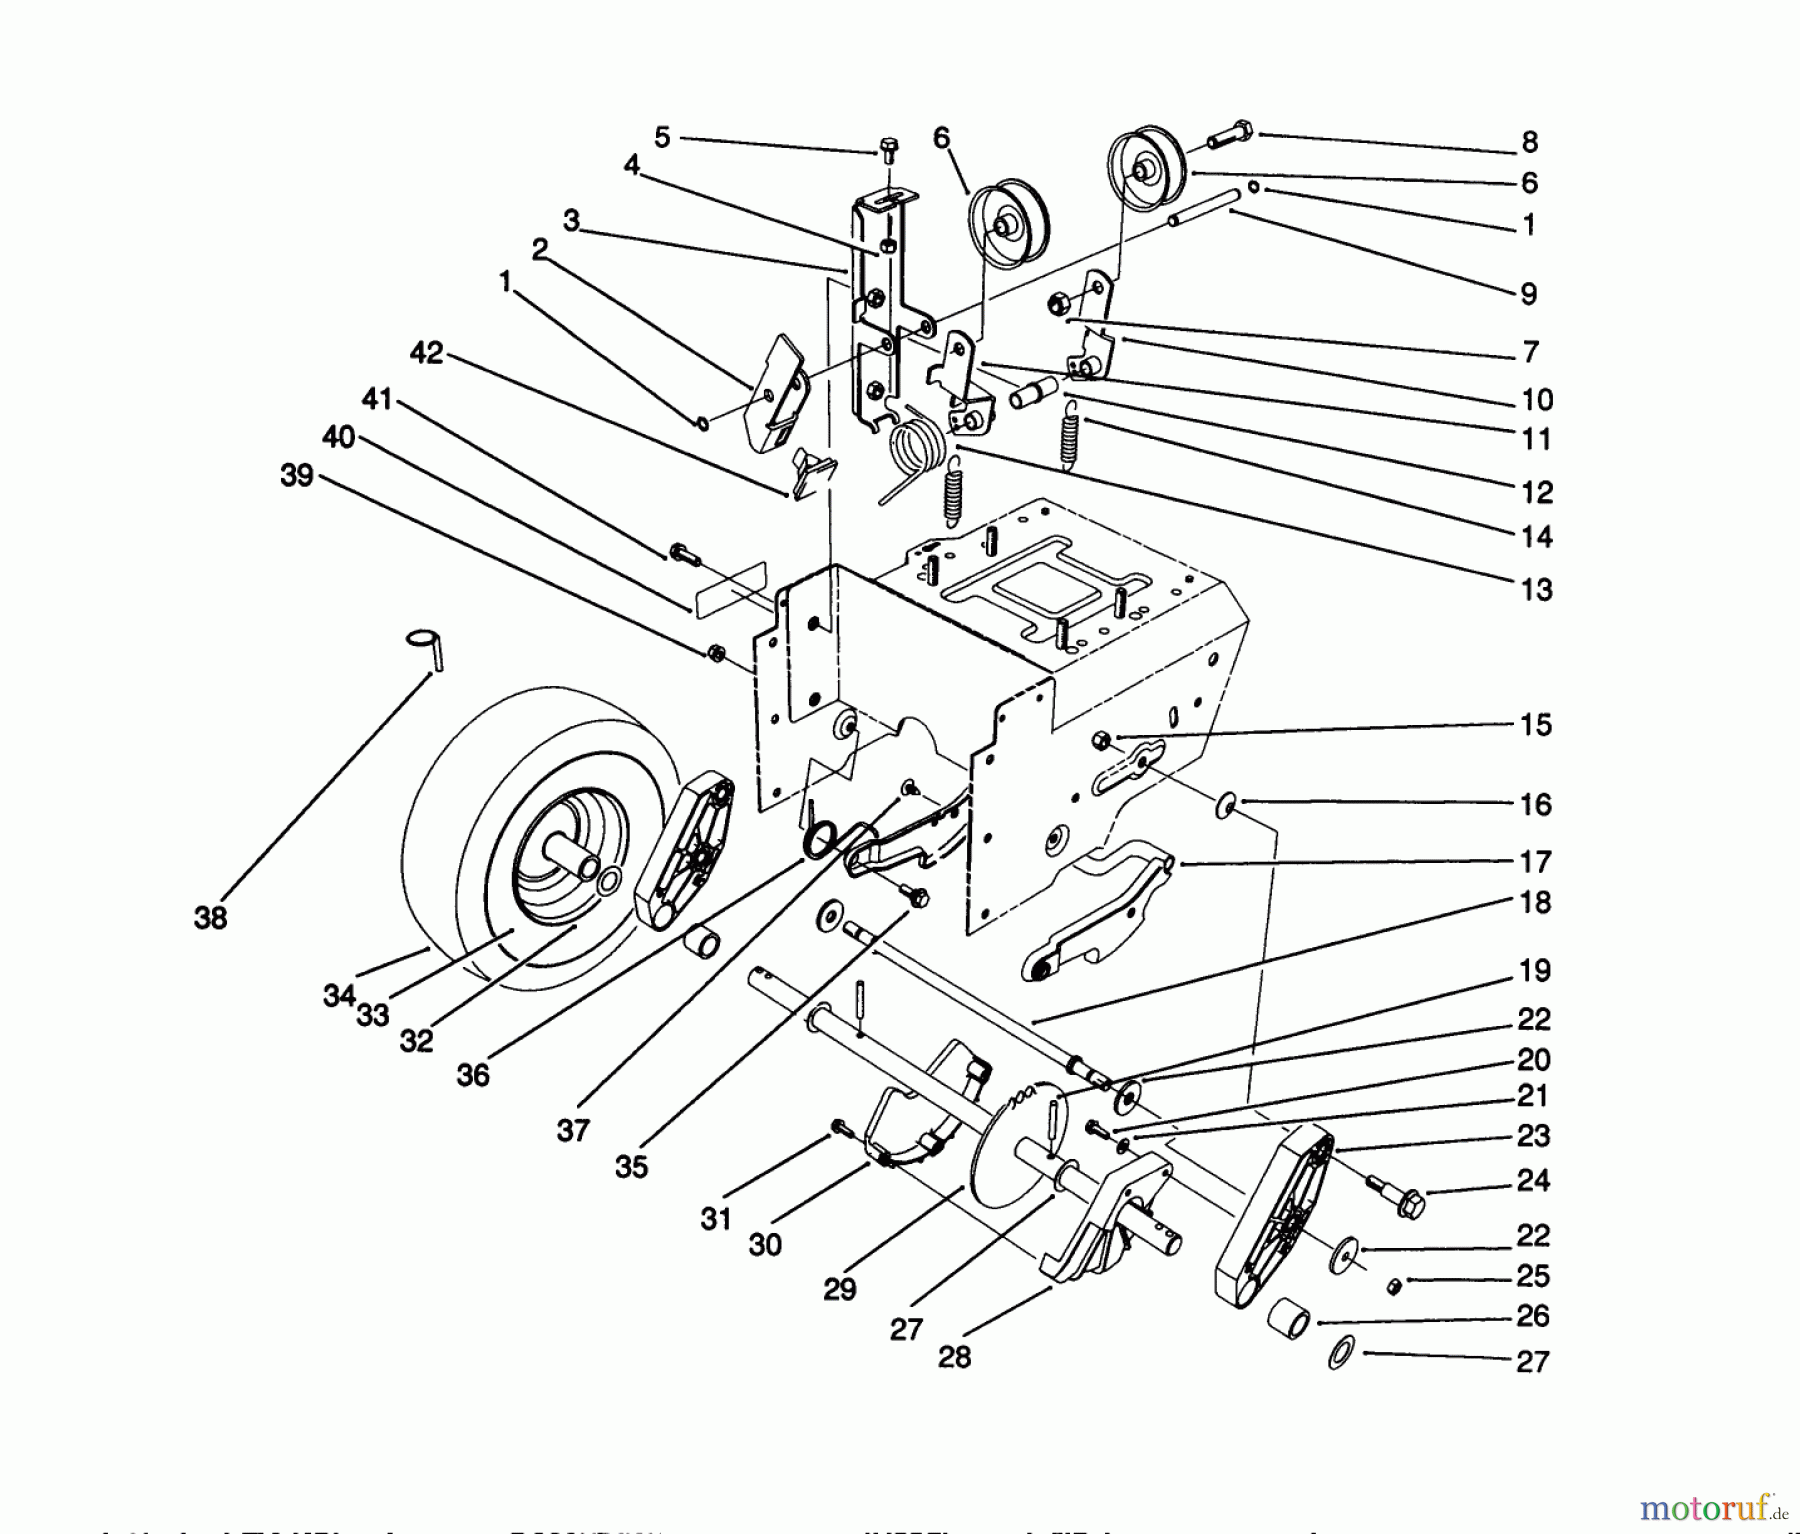  Toro Neu Snow Blowers/Snow Throwers Seite 1 38540 (824) - Toro 824 Power Shift Snowthrower, 1990 (0000001-0999999) TRACTION DRIVE ASSEMBLY